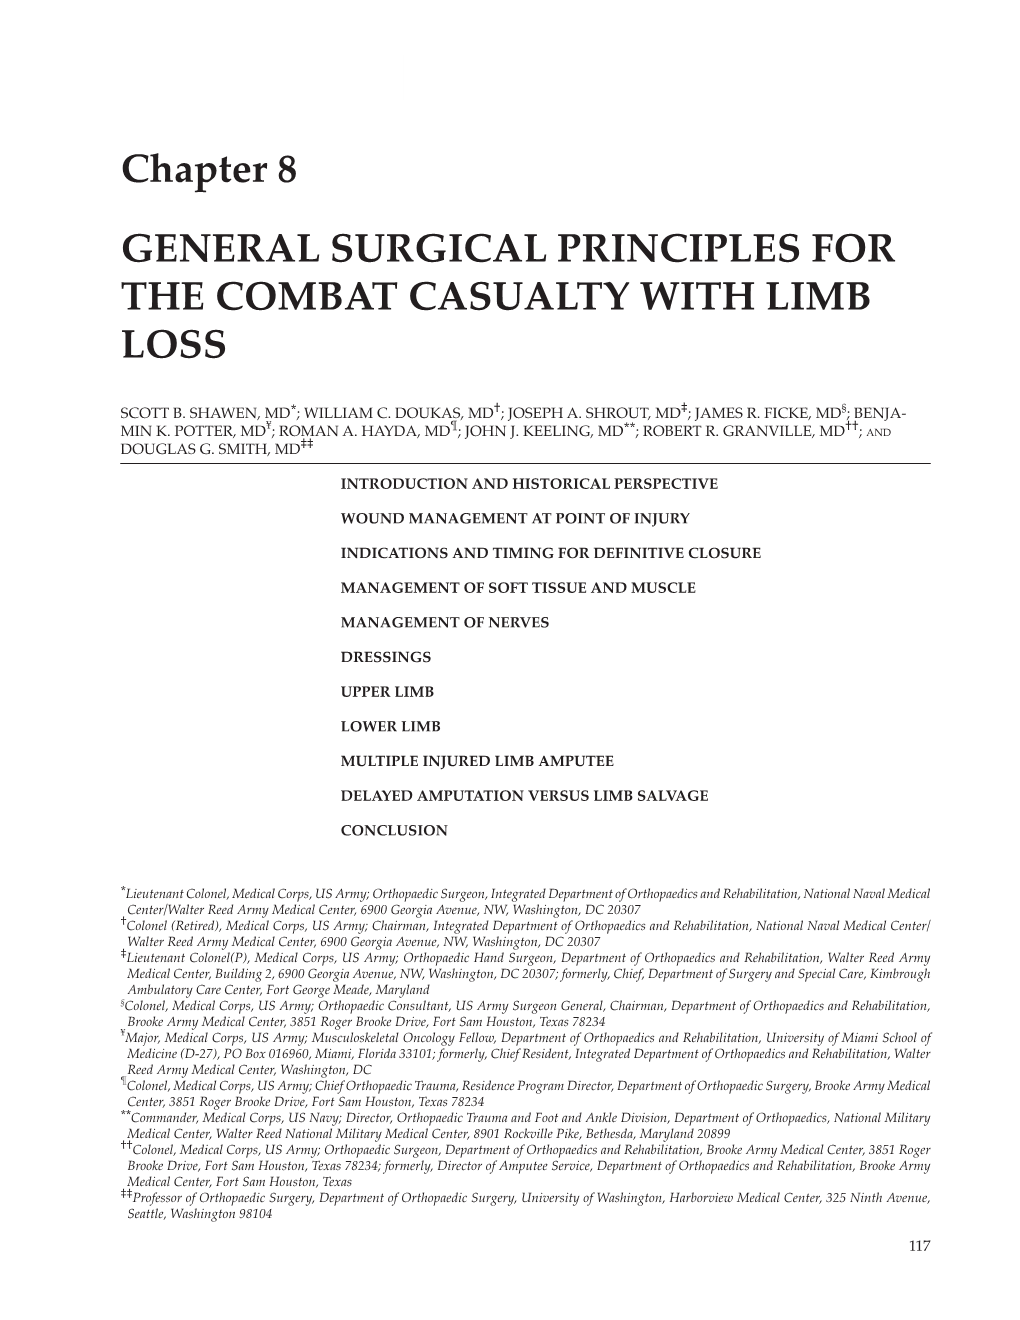 Chapter 8 GENERAL SURGICAL PRINCIPLES for the COMBAT CASUALTY with LIMB LOSS